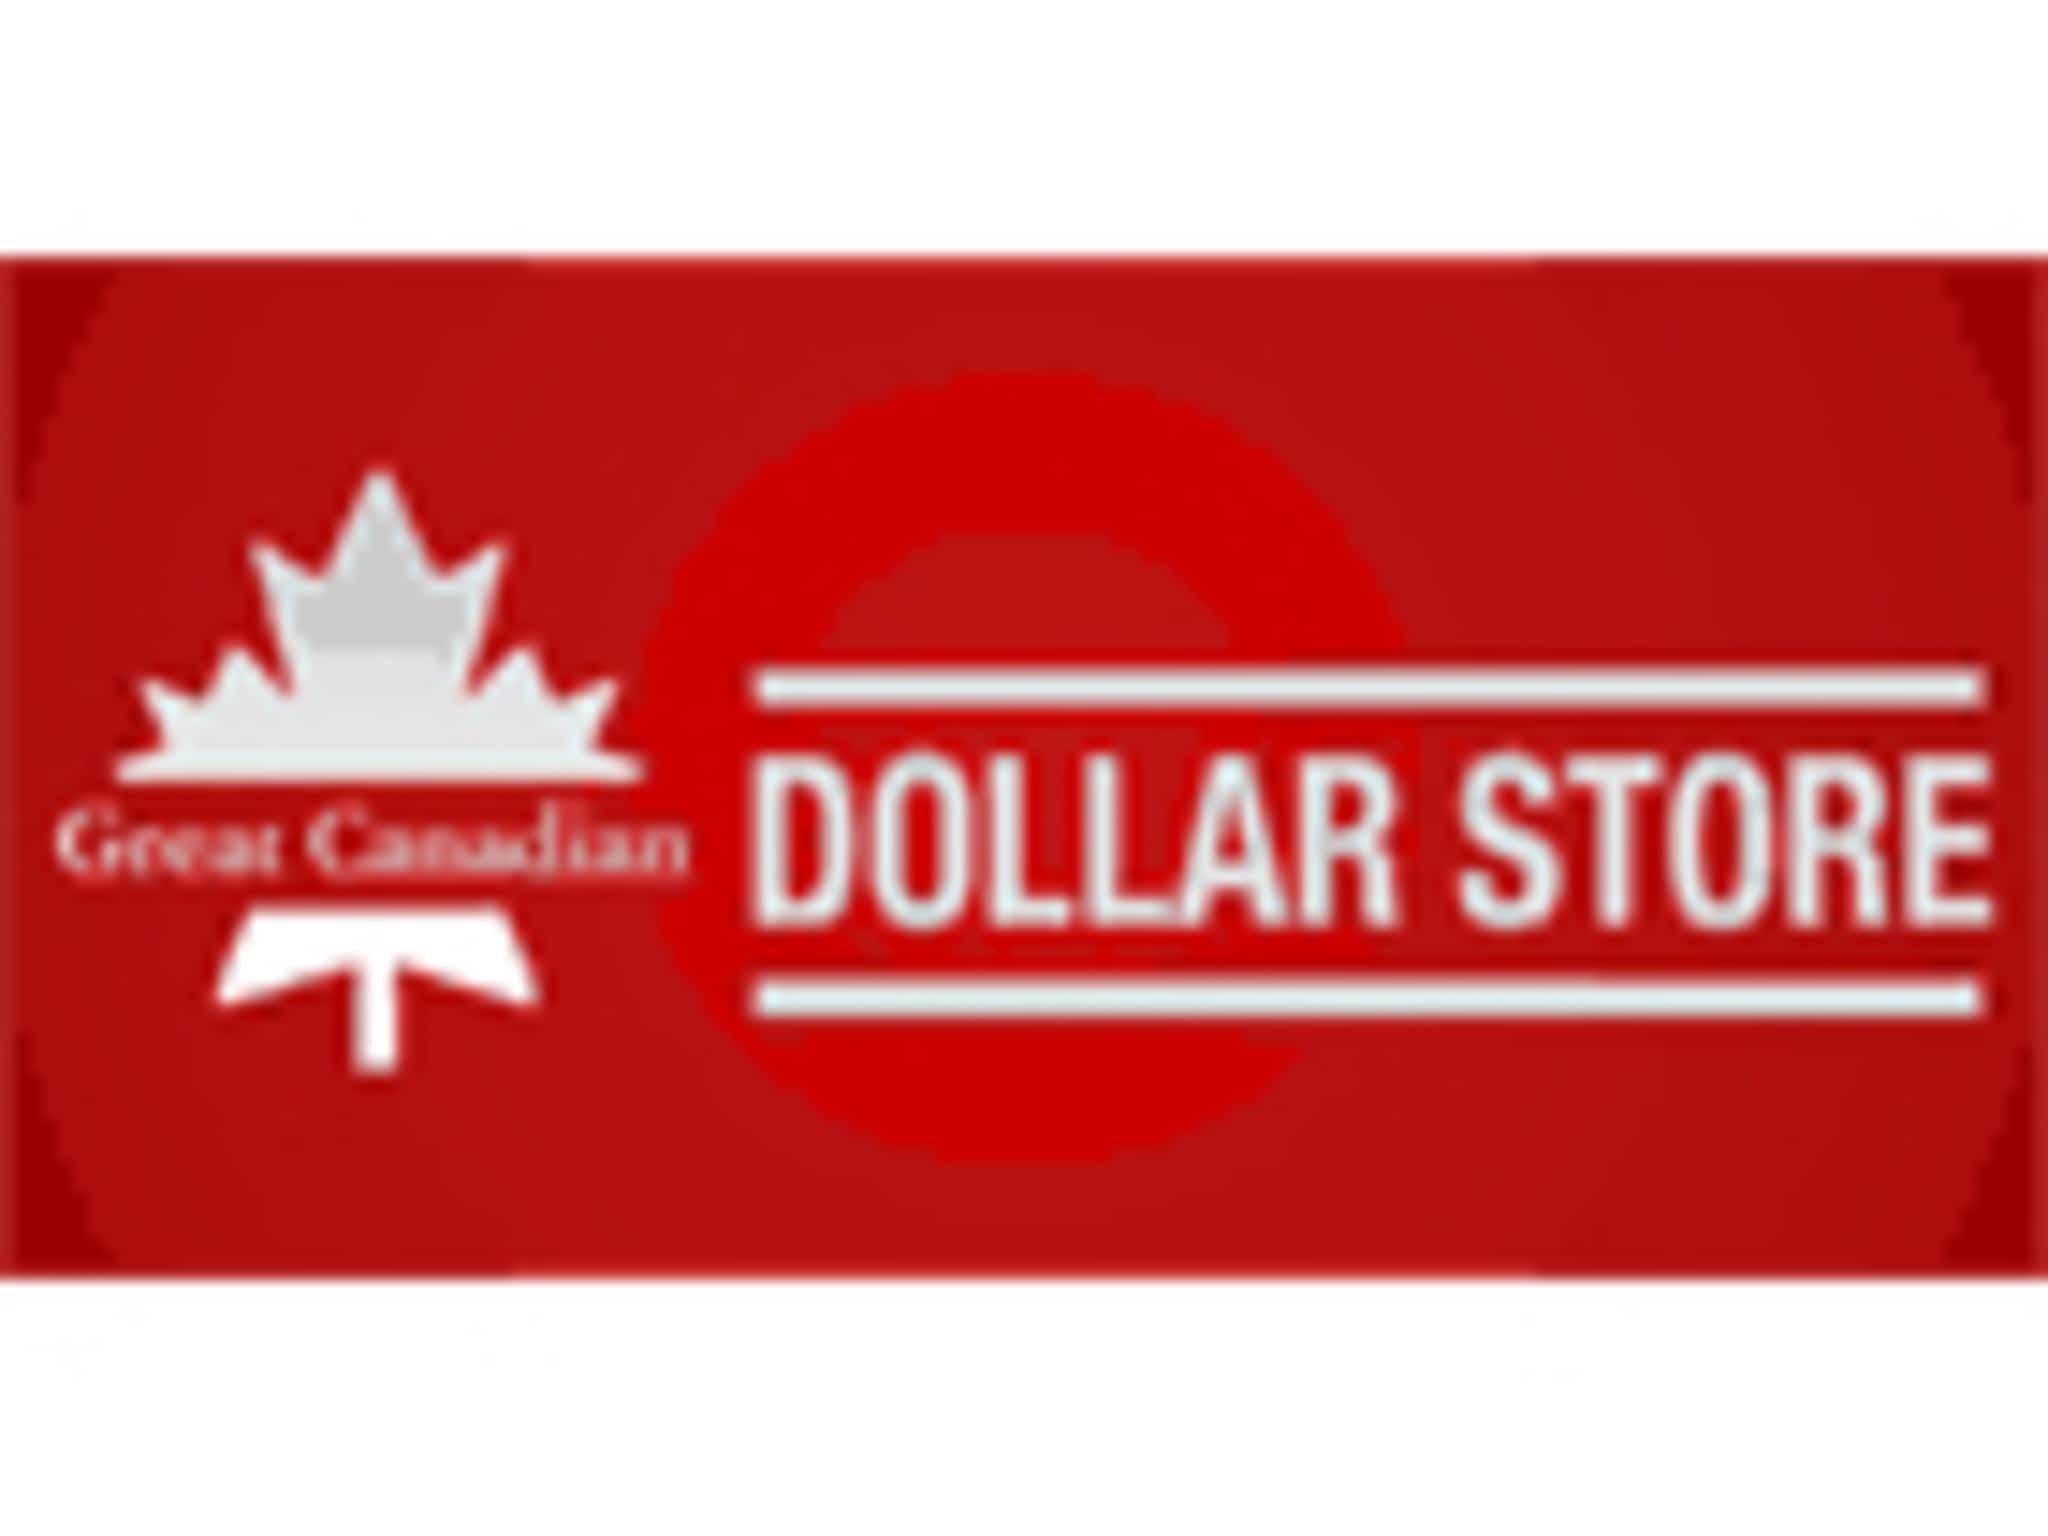 photo Great Canadian Dollar Store